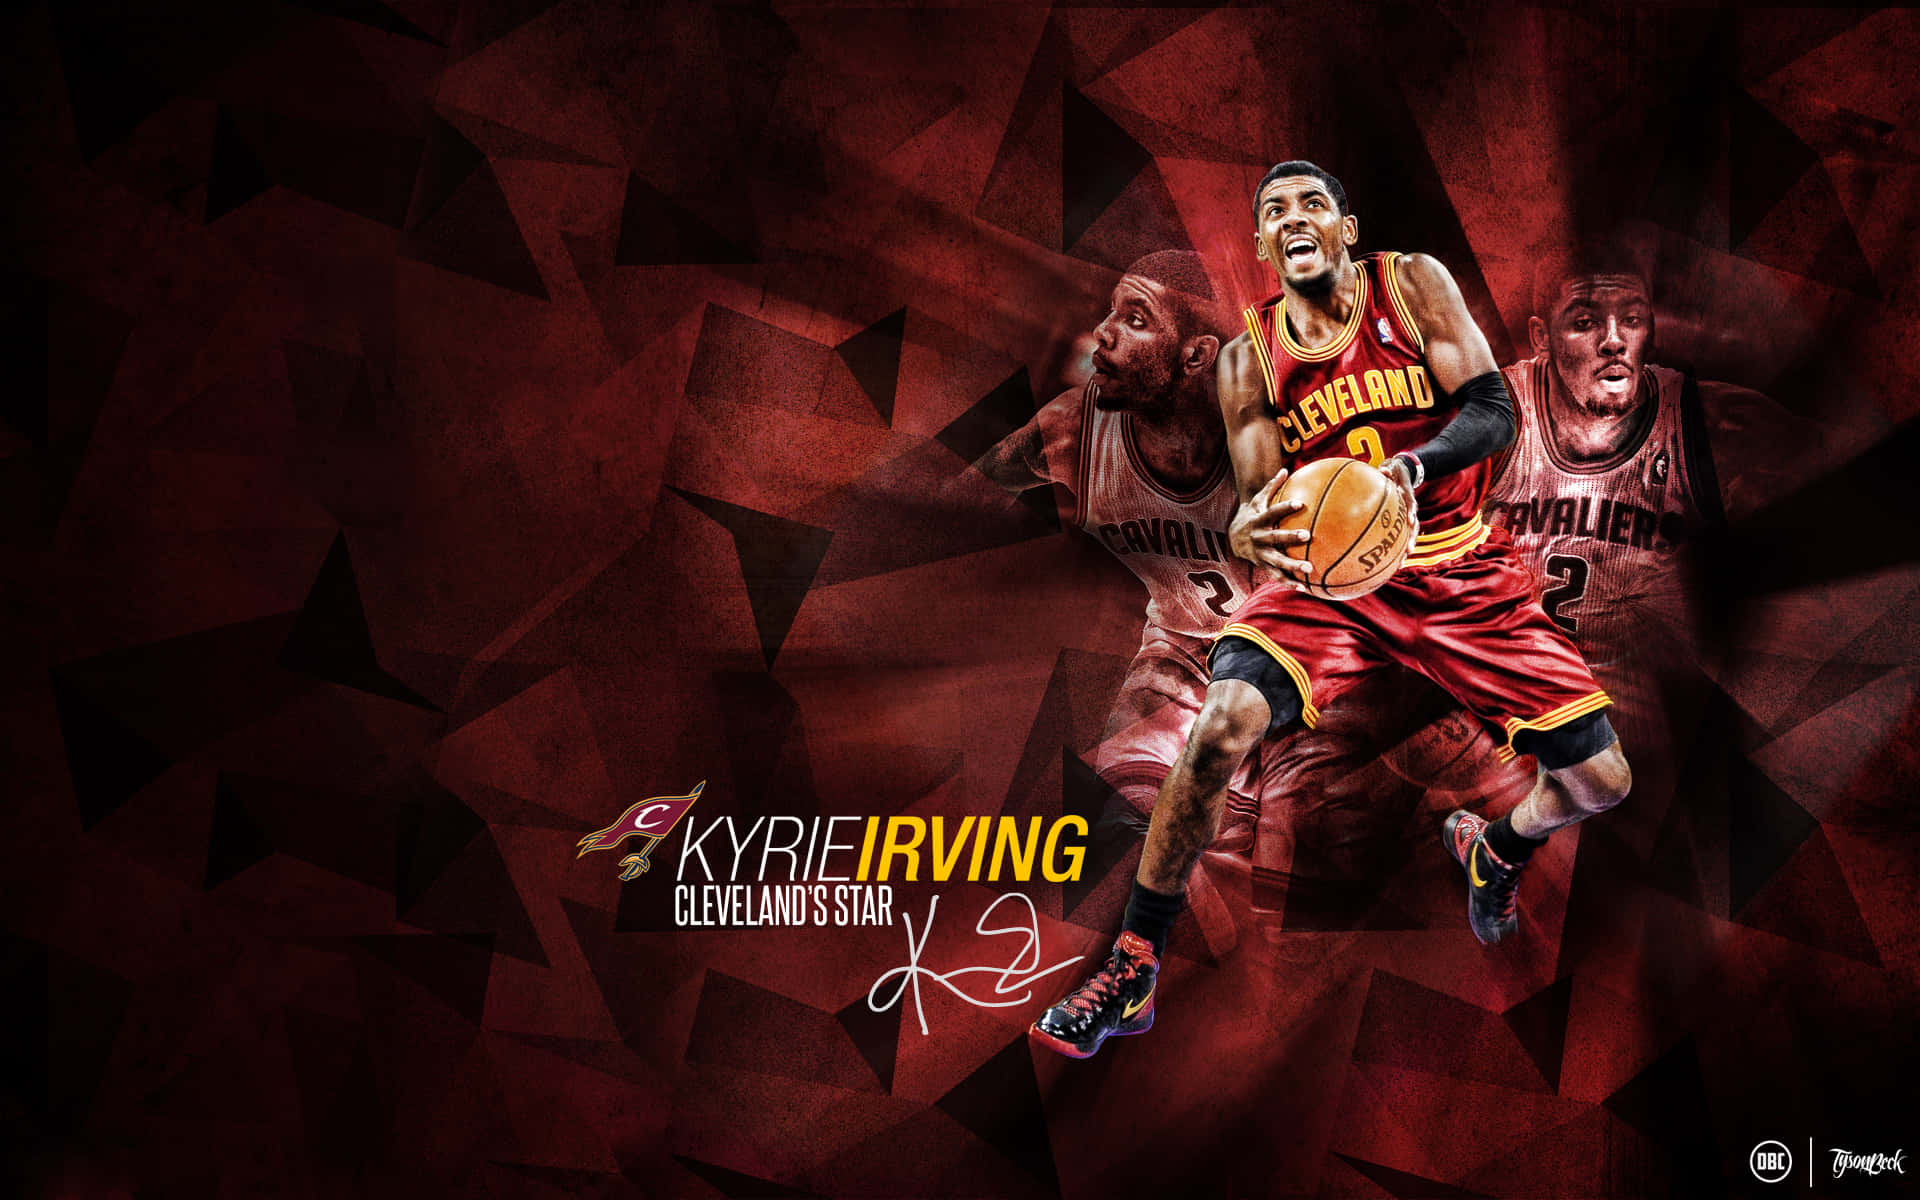 Professional Basketball Player Kyrie Irving Looks Cool and Determined On the Court Wallpaper